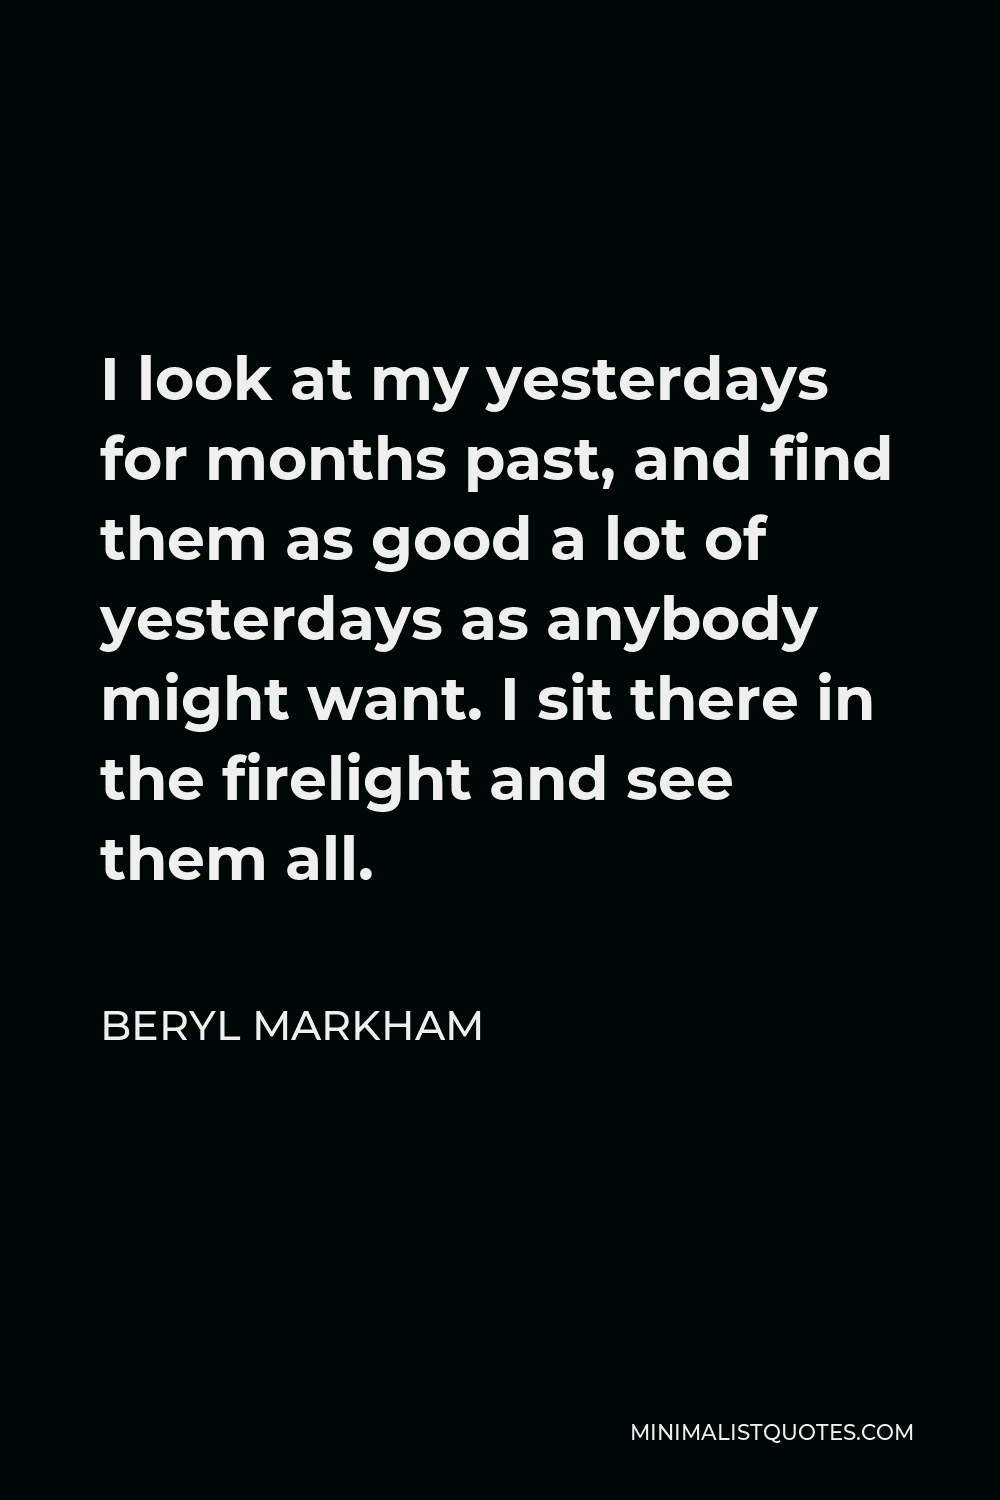 Beryl Markham Quote - I look at my yesterdays for months past, and find them as good a lot of yesterdays as anybody might want. I sit there in the firelight and see them all.